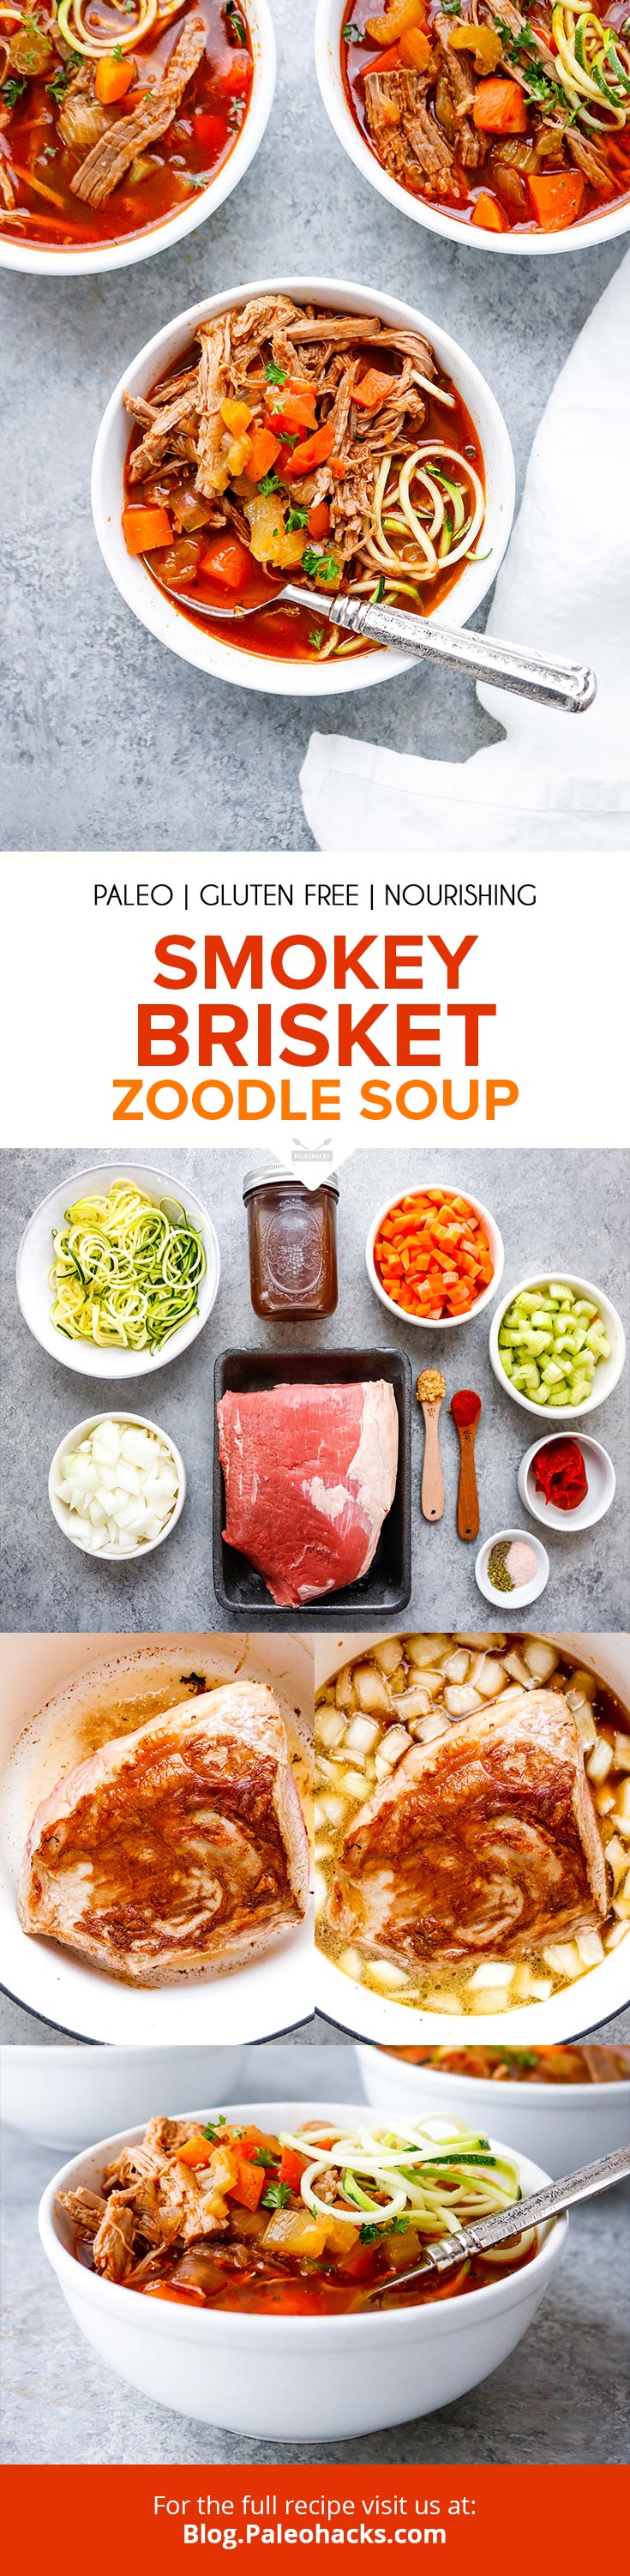 Fill your soup bowl with juicy brisket and a medley of veggies for a stick-to-your-ribs meal that melts in your mouth. Cozier than your favorite sweater!